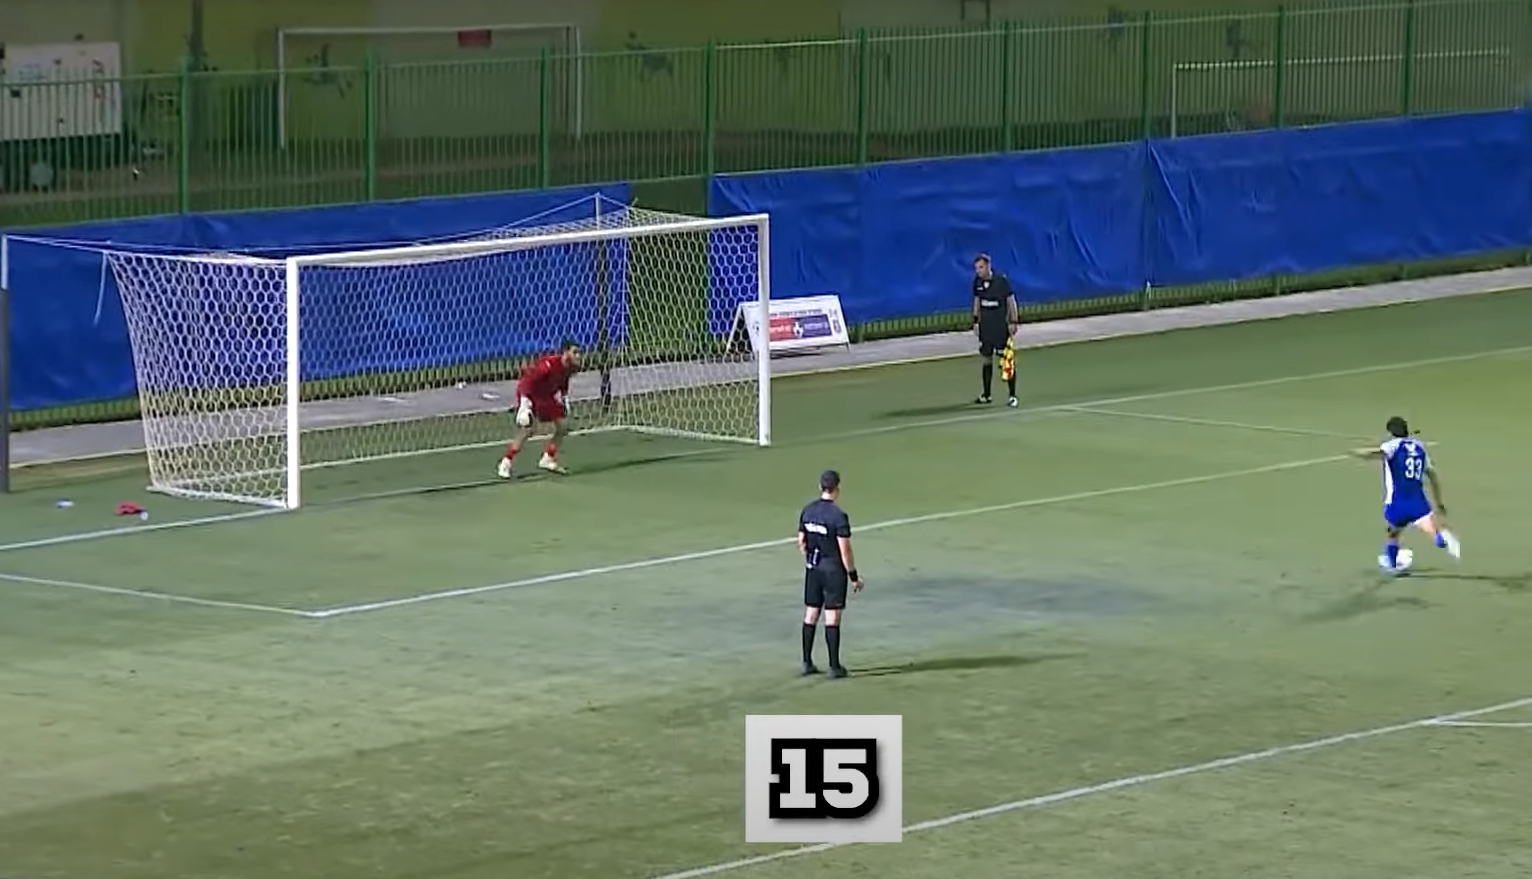 Lasted 45 minutes: the longest penalty shootout in the history of football was played. Video